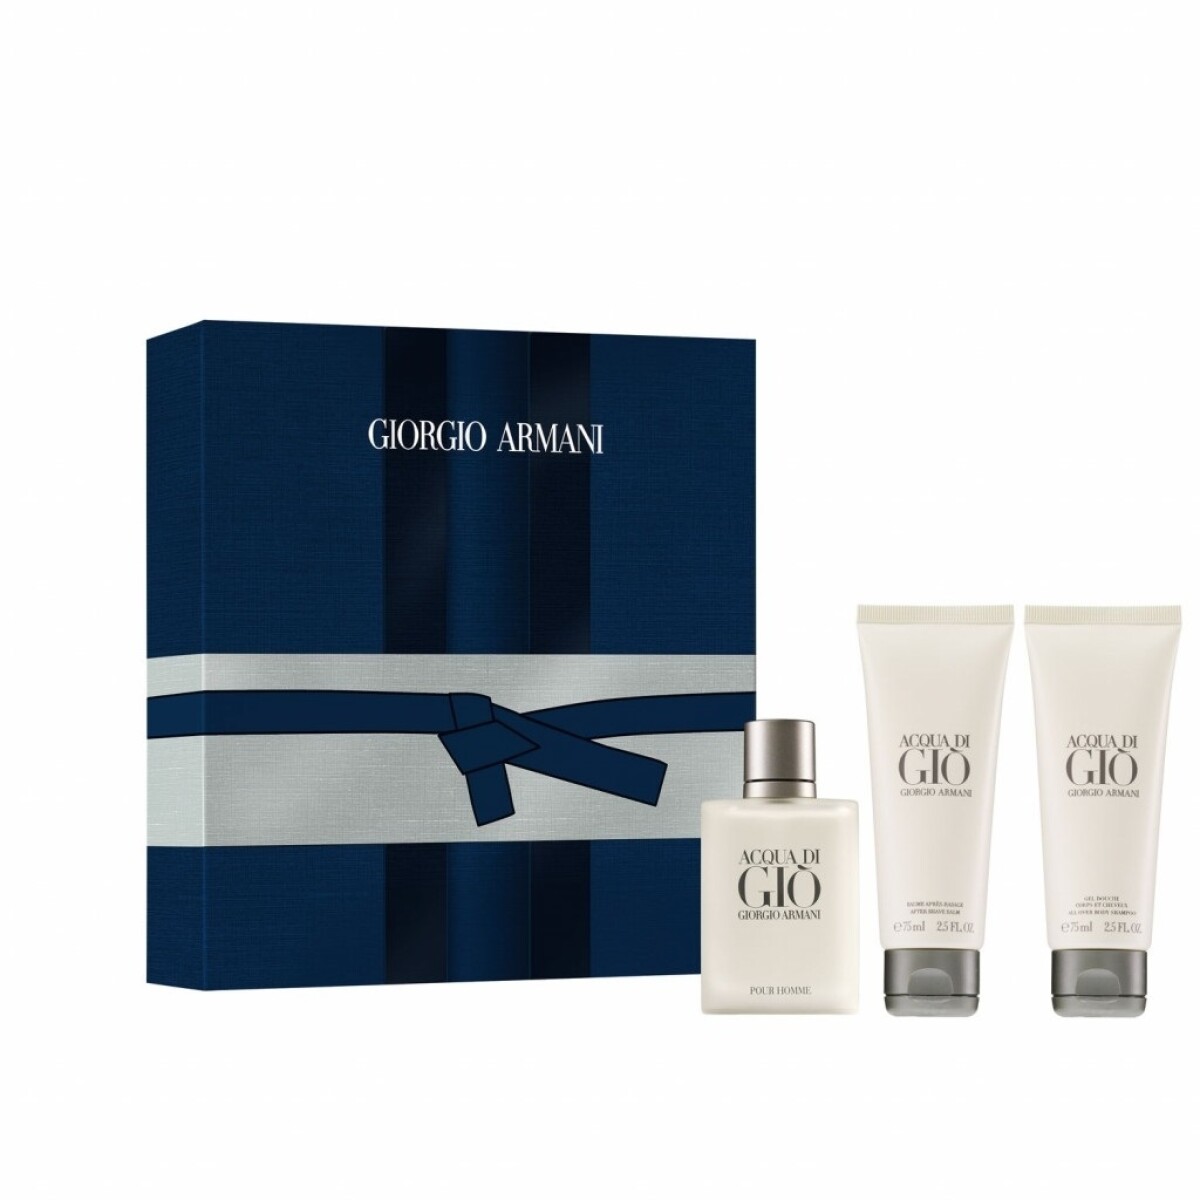 Perfume Acqua Di Gio Homme Edt 50 Ml. + Gel + After Shave 